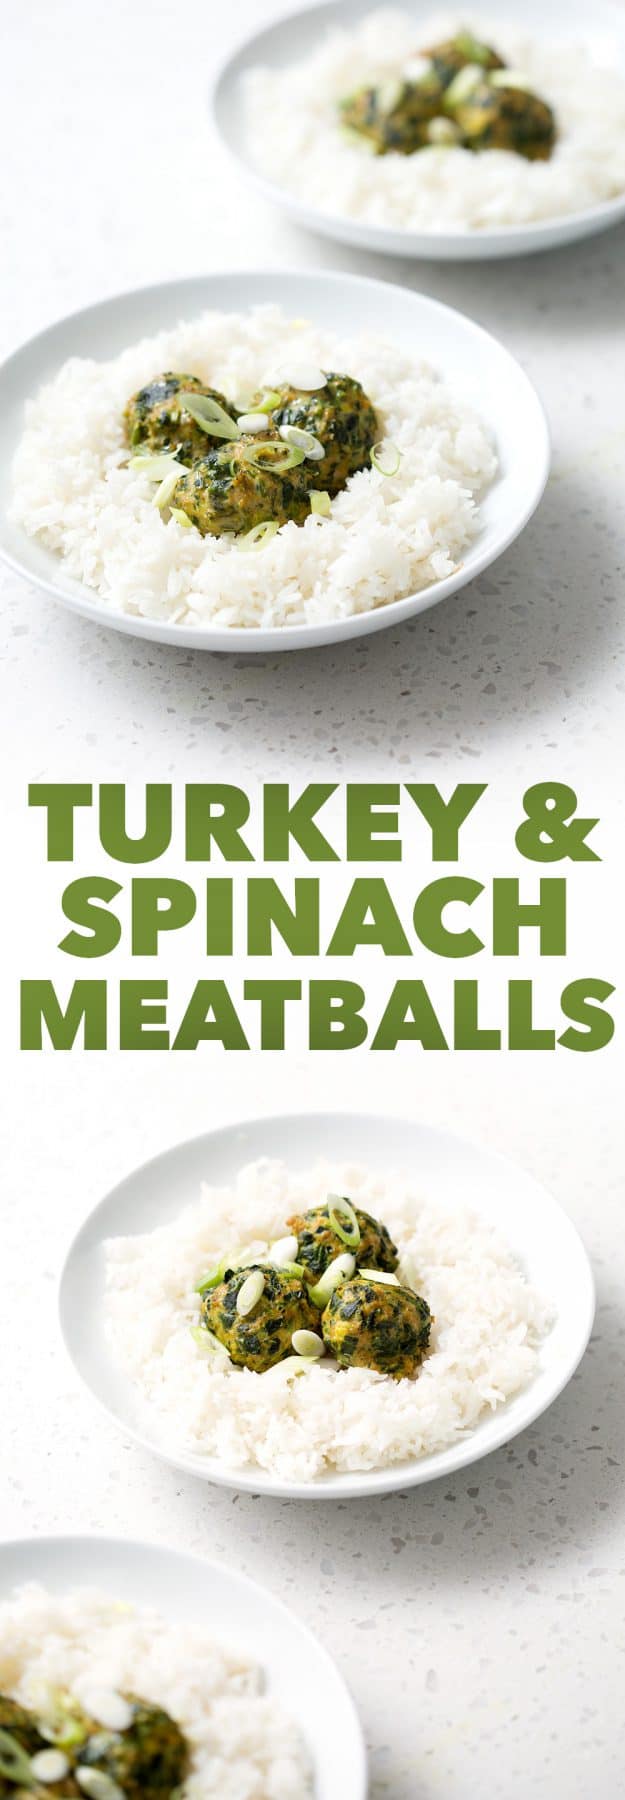 These Turkey and Spinach Meatballs are juicy and packed with flavor from fresh basil and lots of green onions. They taste great on their own or with your favorite pasta sauce. This recipe is allergy friendly (gluten, dairy, shellfish, nut, egg, and soy free) and suits the autoimmune protocol (AIP) and paleo diets.